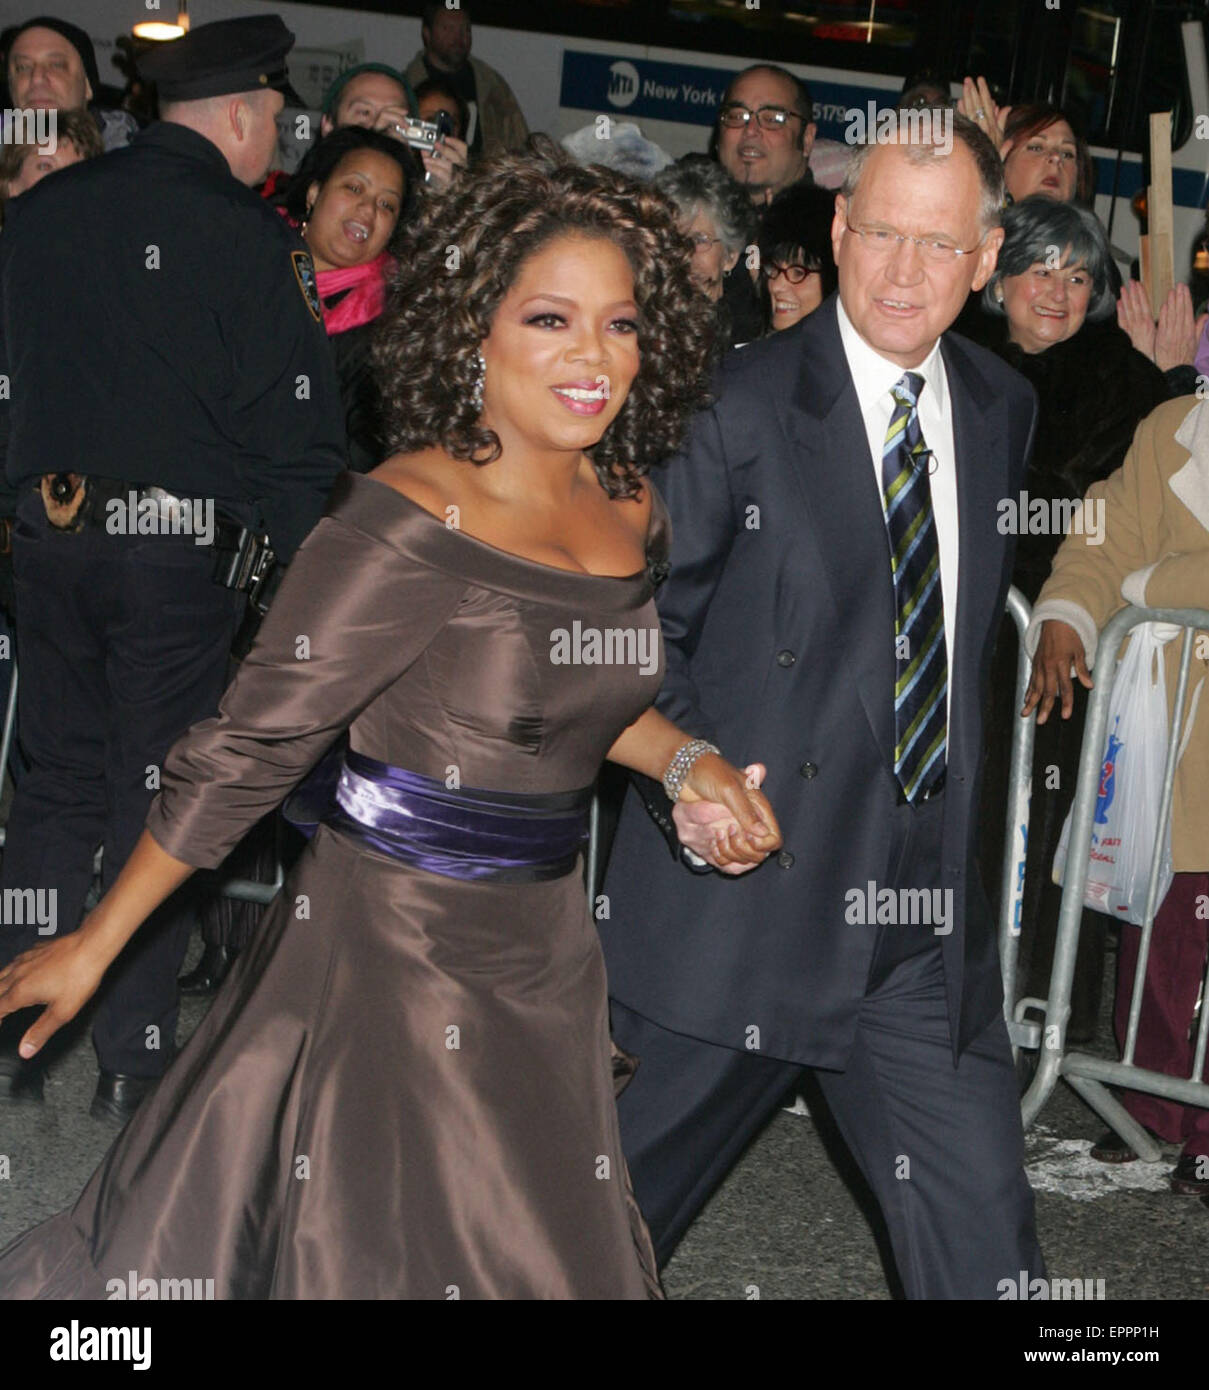 May 20, 2015 - TV show host comedian DAVID LETTERMAN retires 'Late Show with David Letterman' after 33 years and 6,028 broadcasts. File: Pictured - Dec 01, 2005 - New York - Oprah Winfrey and David Letterman at the arrivals for the Broadway Premiere of 'The Color Purple' held at The Broadway Theater. © Nancy Kaszerman/ZUMA Wire/ZUMAPRESS.com/Alamy Live News Stock Photo